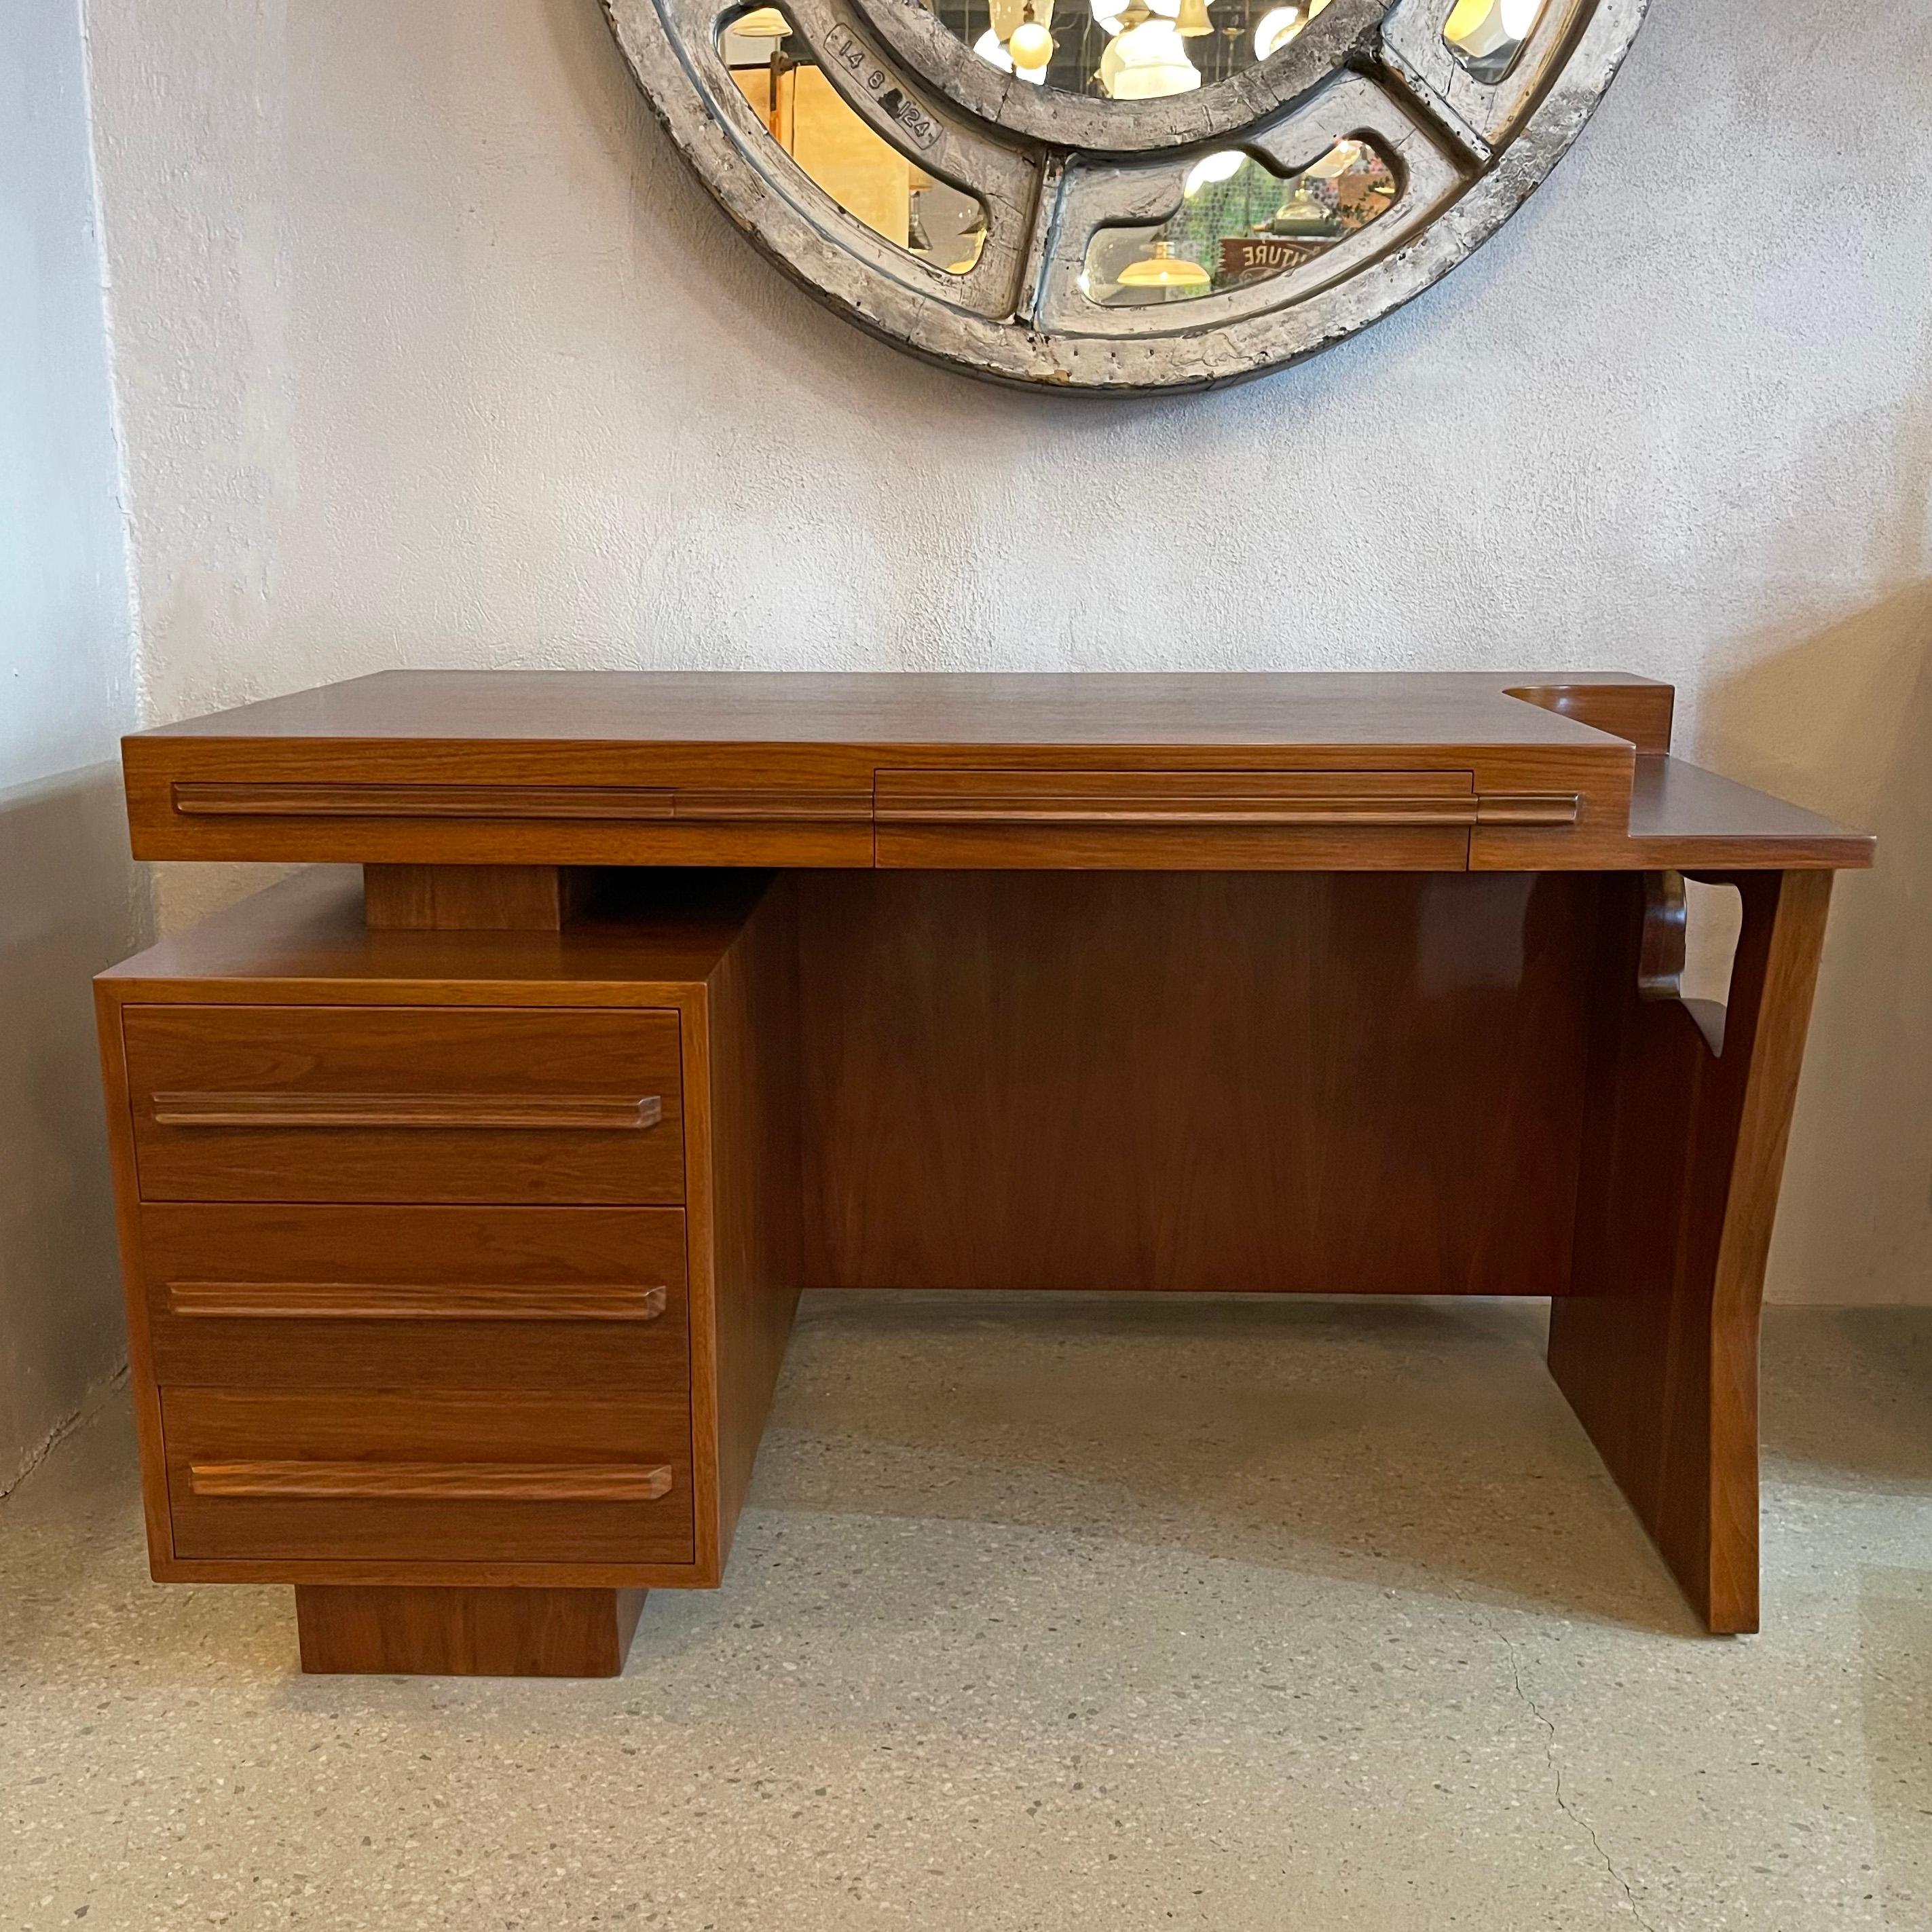 Mid-century modern, walnut desk has numerous outstanding features. The split-level floating top has a curved indentation, concealed segmented drawer and pull-out ledge for additional work surface. There is a decorative, biomorphic cut-out on one